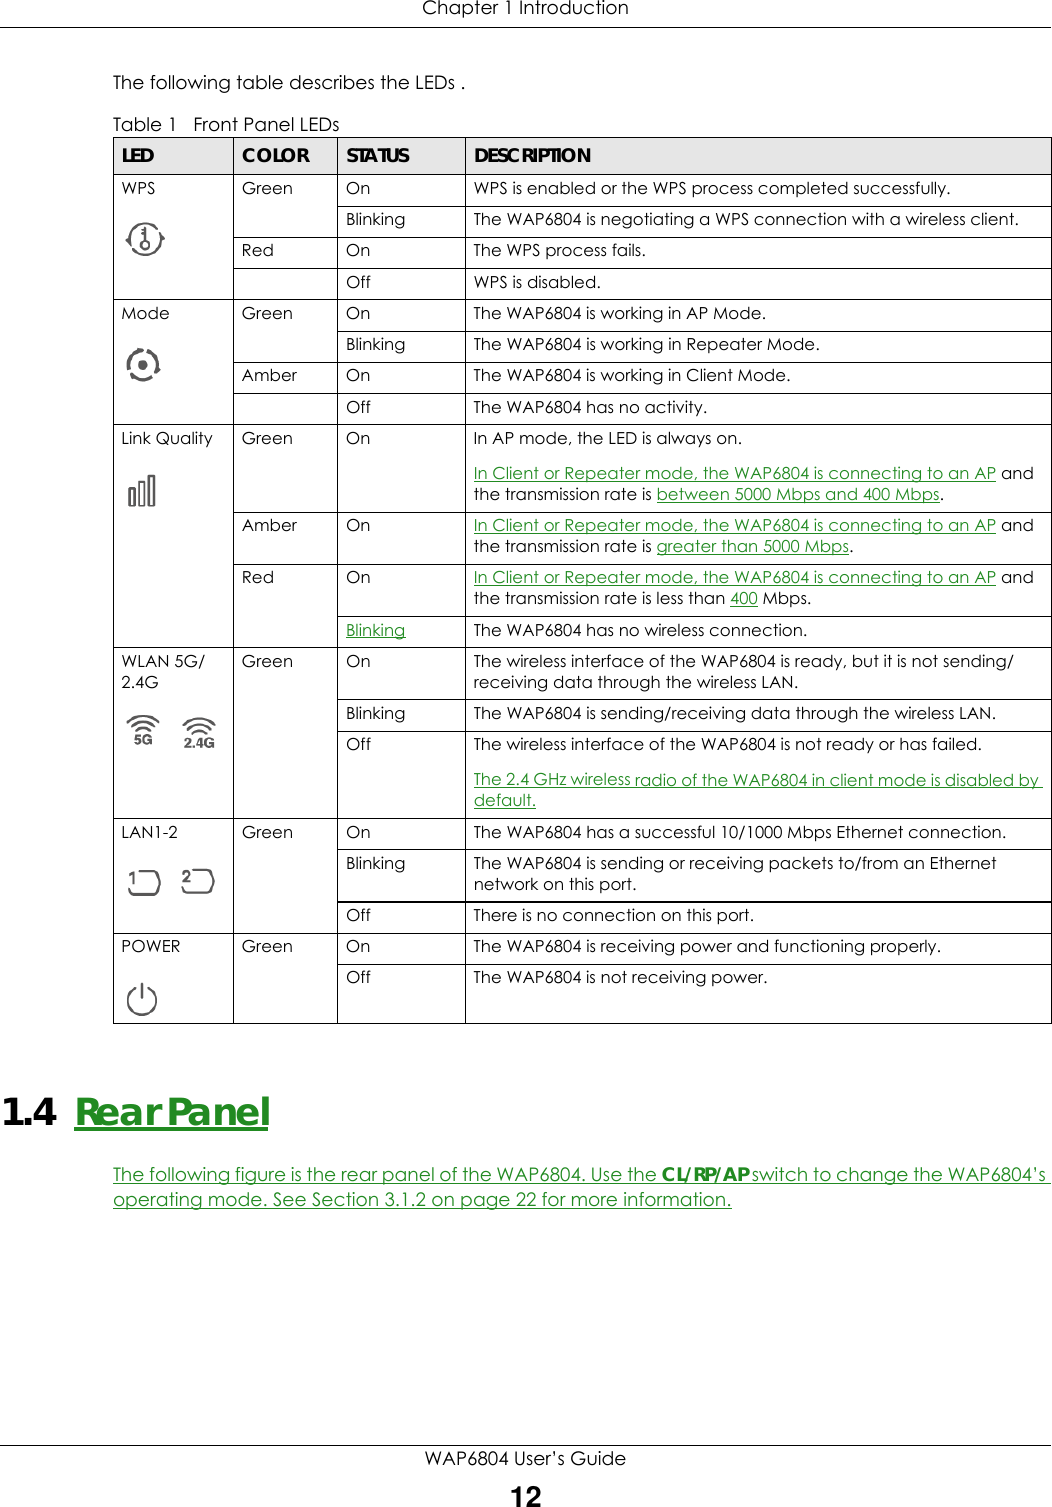 Chapter 1 IntroductionWAP6804 User’s Guide12The following table describes the LEDs .1.4  Rear PanelThe following figure is the rear panel of the WAP6804. Use the CL/RP/AP switch to change the WAP6804’s operating mode. See Section 3.1.2 on page 22 for more information.Table 1   Front Panel LEDsLED COLOR STATUS DESCRIPTIONWPS Green On WPS is enabled or the WPS process completed successfully.Blinking The WAP6804 is negotiating a WPS connection with a wireless client.Red On The WPS process fails.Off WPS is disabled.Mode Green On The WAP6804 is working in AP Mode.Blinking The WAP6804 is working in Repeater Mode.Amber On The WAP6804 is working in Client Mode.Off The WAP6804 has no activity.Link Quality Green On In AP mode, the LED is always on.In Client or Repeater mode, the WAP6804 is connecting to an AP and the transmission rate is between 5000 Mbps and 400 Mbps.Amber On In Client or Repeater mode, the WAP6804 is connecting to an AP and the transmission rate is greater than 5000 Mbps.Red On In Client or Repeater mode, the WAP6804 is connecting to an AP and the transmission rate is less than 400 Mbps.Blinking The WAP6804 has no wireless connection.WLAN 5G/2.4G Green On The wireless interface of the WAP6804 is ready, but it is not sending/receiving data through the wireless LAN. Blinking The WAP6804 is sending/receiving data through the wireless LAN.Off The wireless interface of the WAP6804 is not ready or has failed.The 2.4 GHz wireless radio of the WAP6804 in client mode is disabled by default.LAN1-2  Green On The WAP6804 has a successful 10/1000 Mbps Ethernet connection.Blinking The WAP6804 is sending or receiving packets to/from an Ethernet network on this port.Off There is no connection on this port.POWER Green On The WAP6804 is receiving power and functioning properly. Off The WAP6804 is not receiving power.